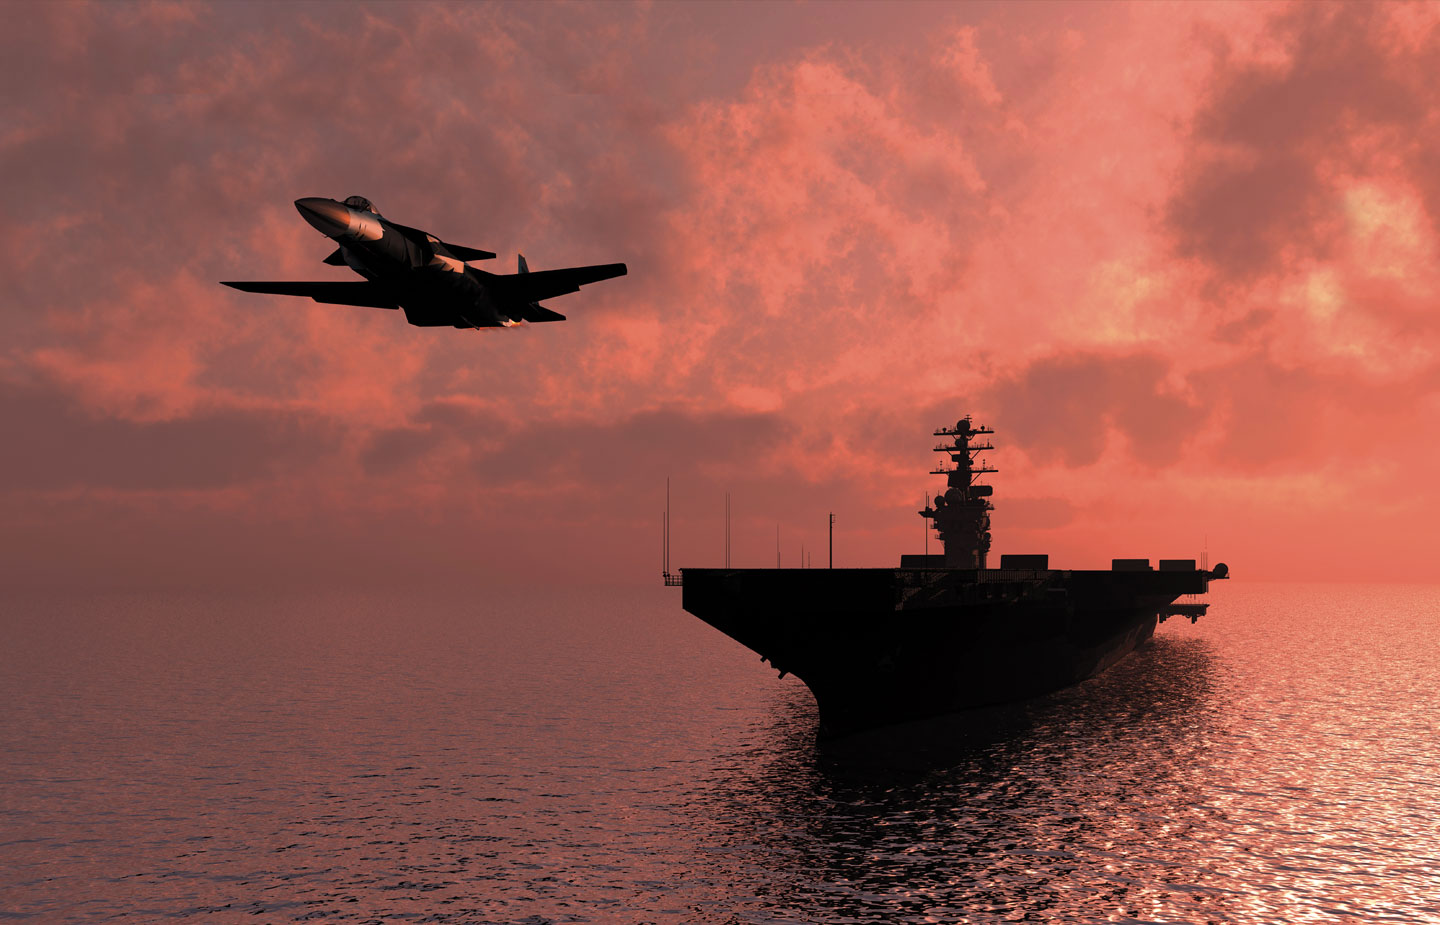 Photo illustration of a plane take off from an aircraft carrier